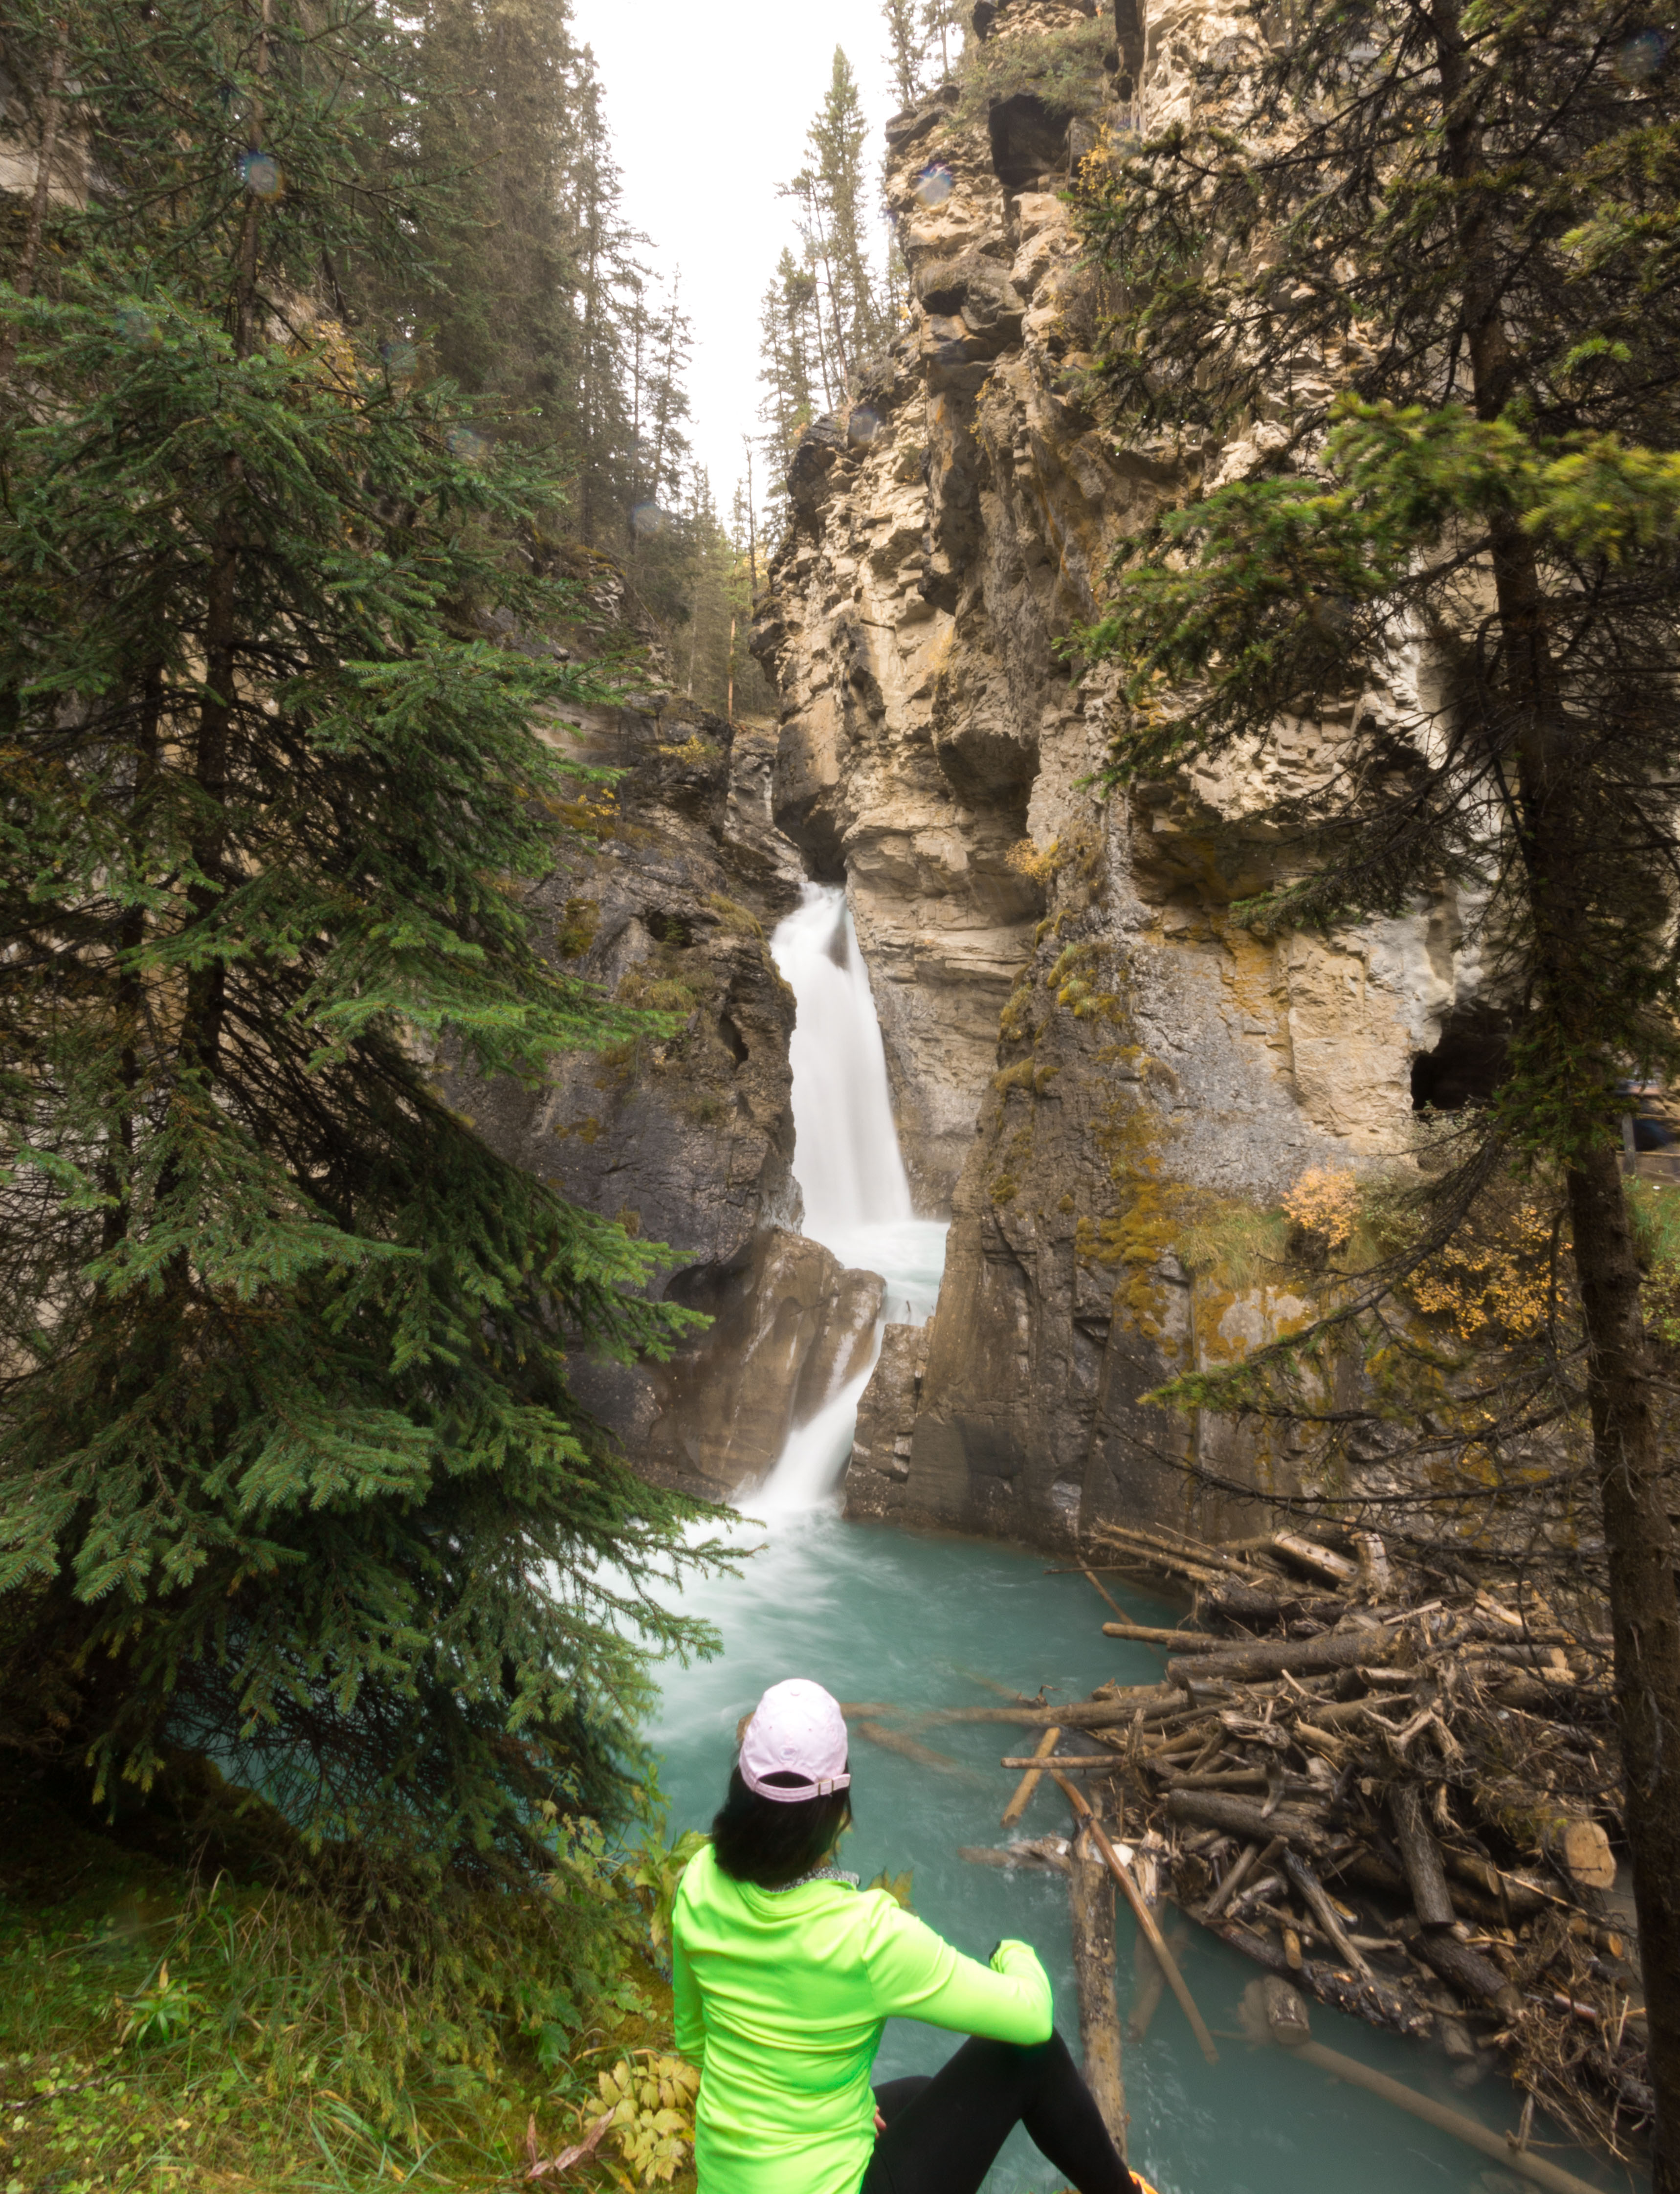 18 Photos that Will Put You on a Plane to Calgary and Banff| Travel-Break.net | A travel blog guide to things to do in Alberta, Canada